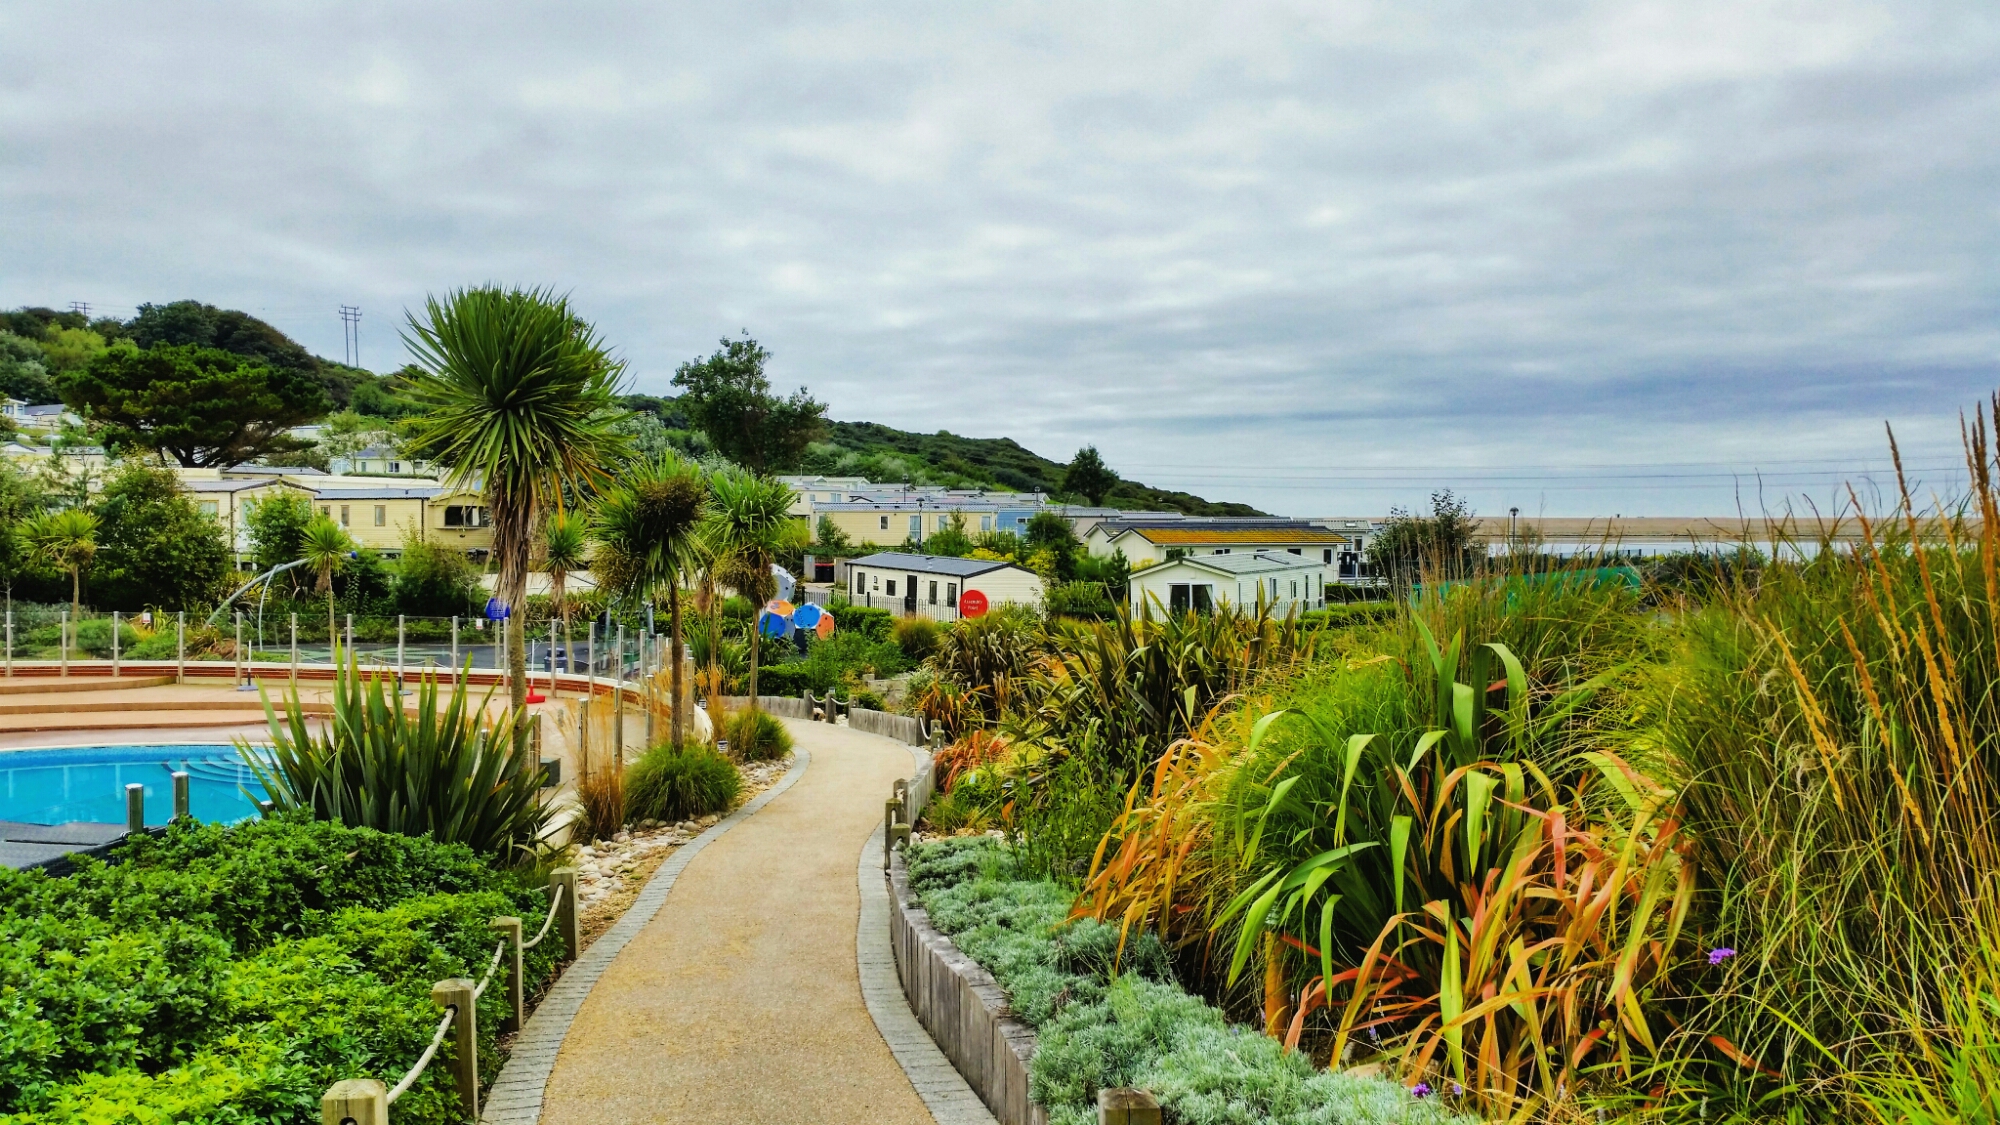 Caravan park, Weymouth, Dorset, England, holidays, places to go, review, Living Life Our Way